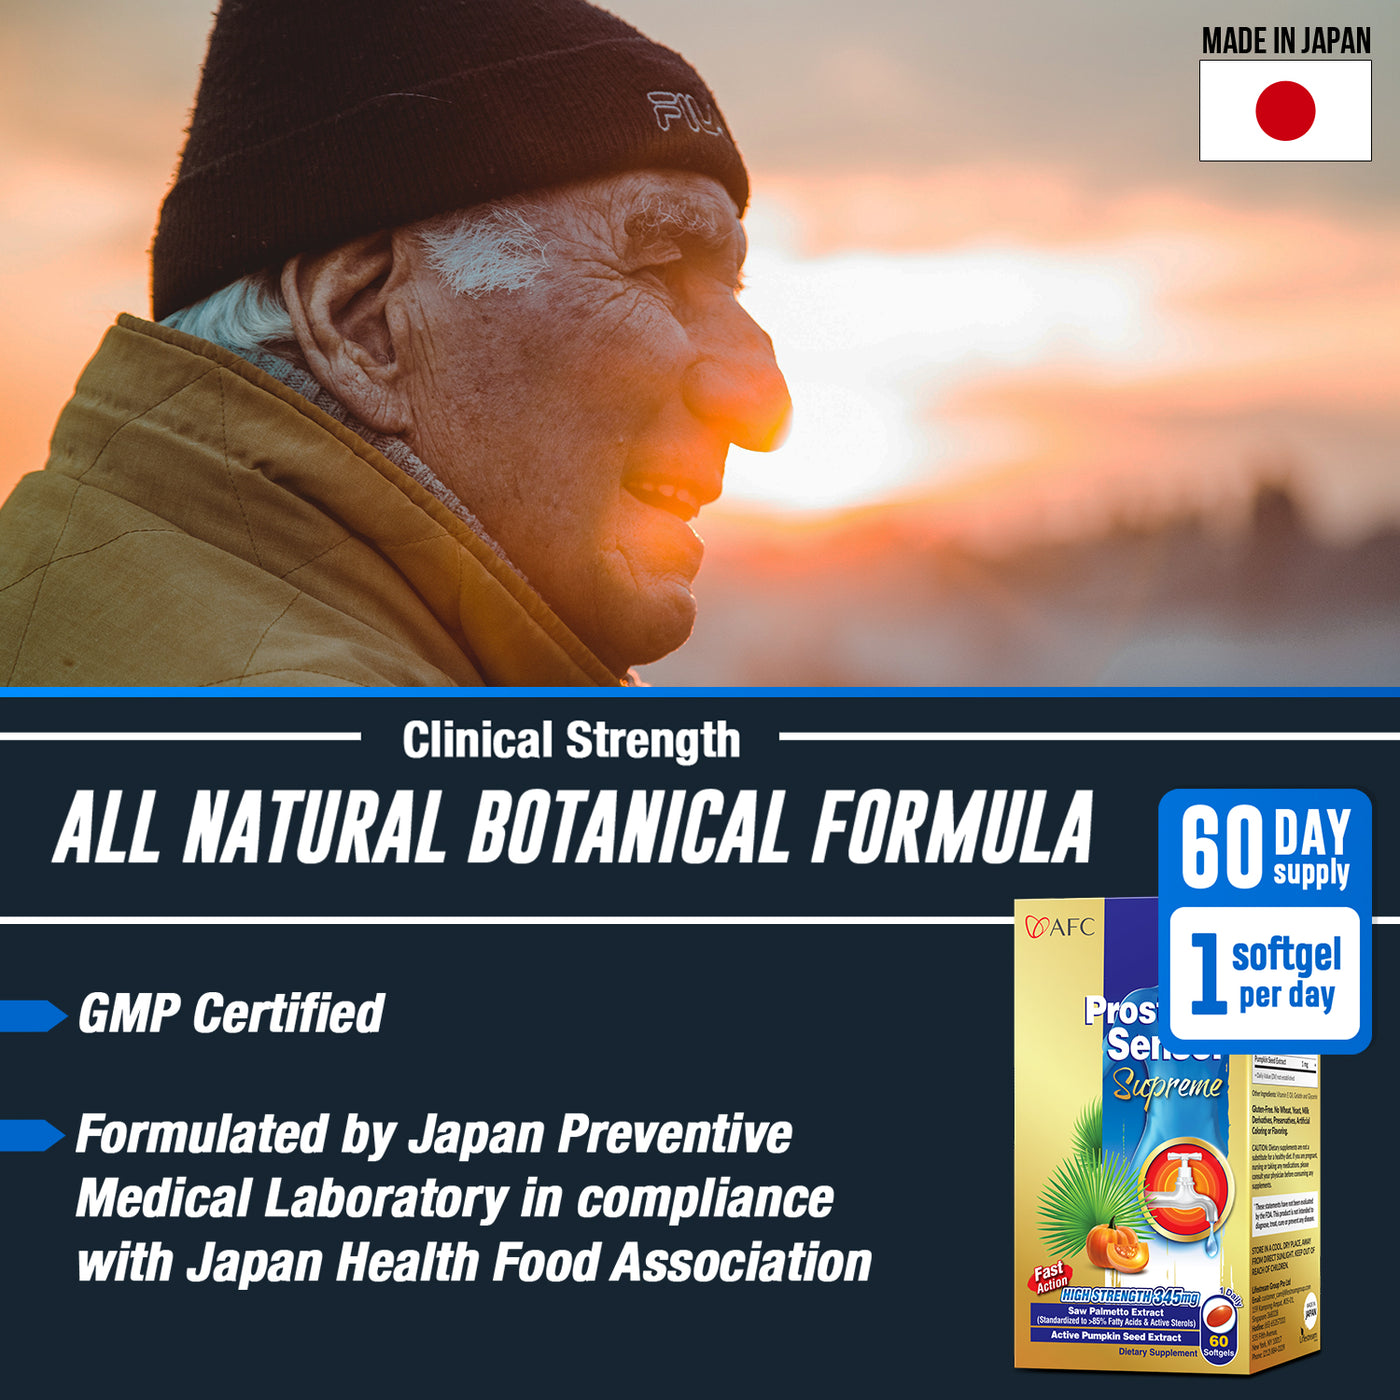 AFC Japan Prostate Sensei Supreme – Clinical Strength Saw Palmetto, >85% Fatty Acids & Active Sterols for Prostate Health, Reduce Frequent Urination - Lifestream Group US